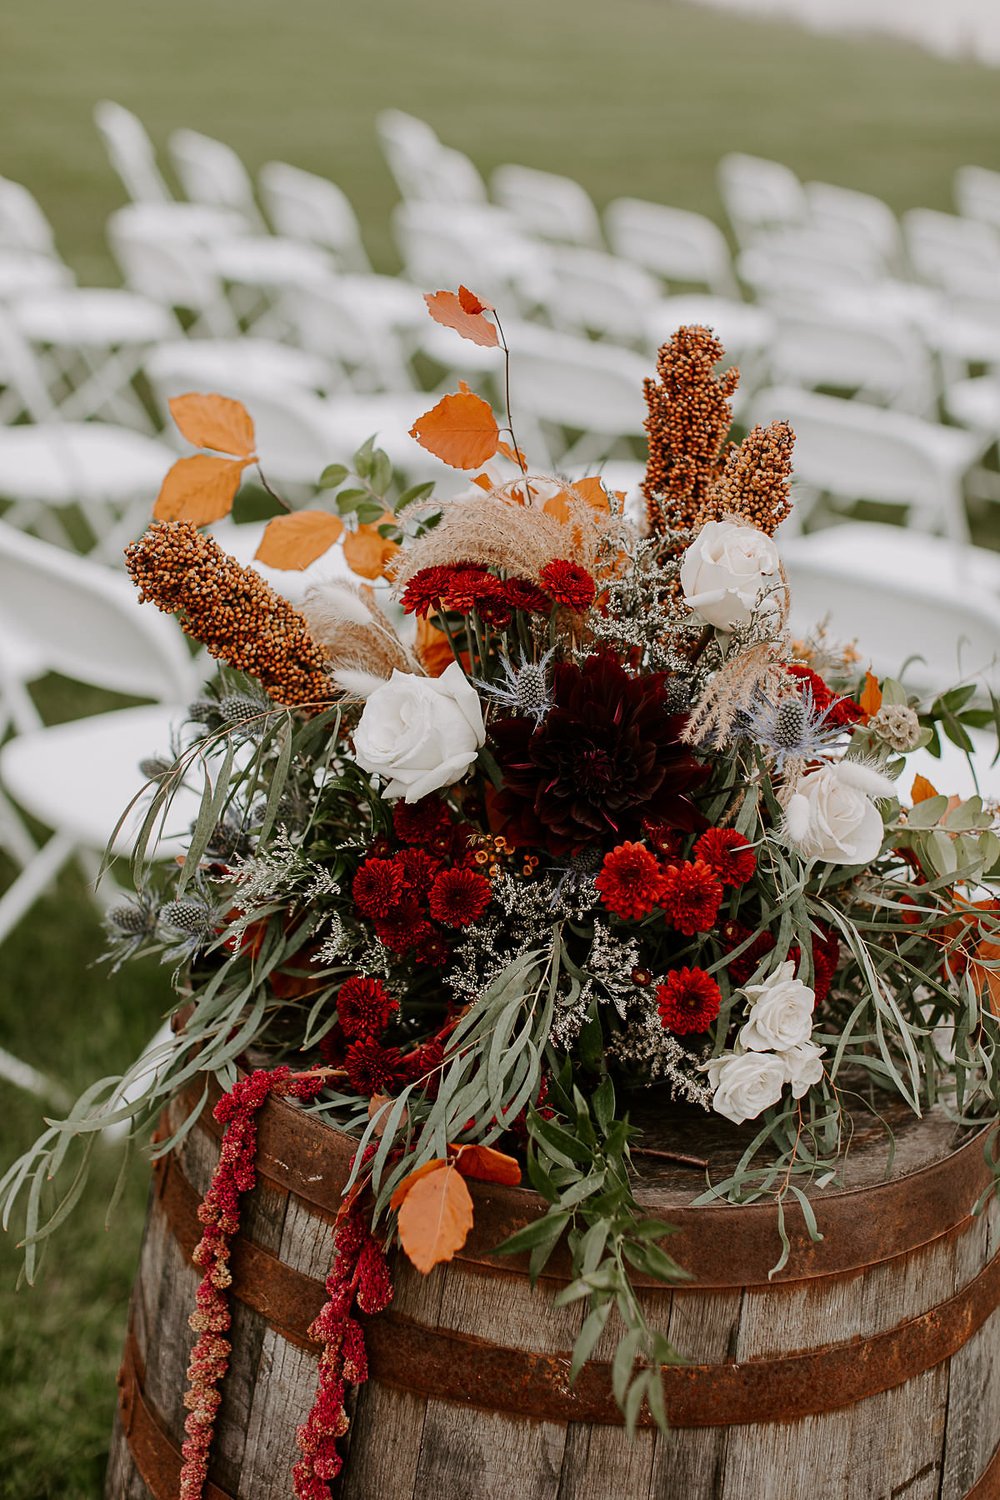 Fall wedding florals placed on barrel at outdoor wedding